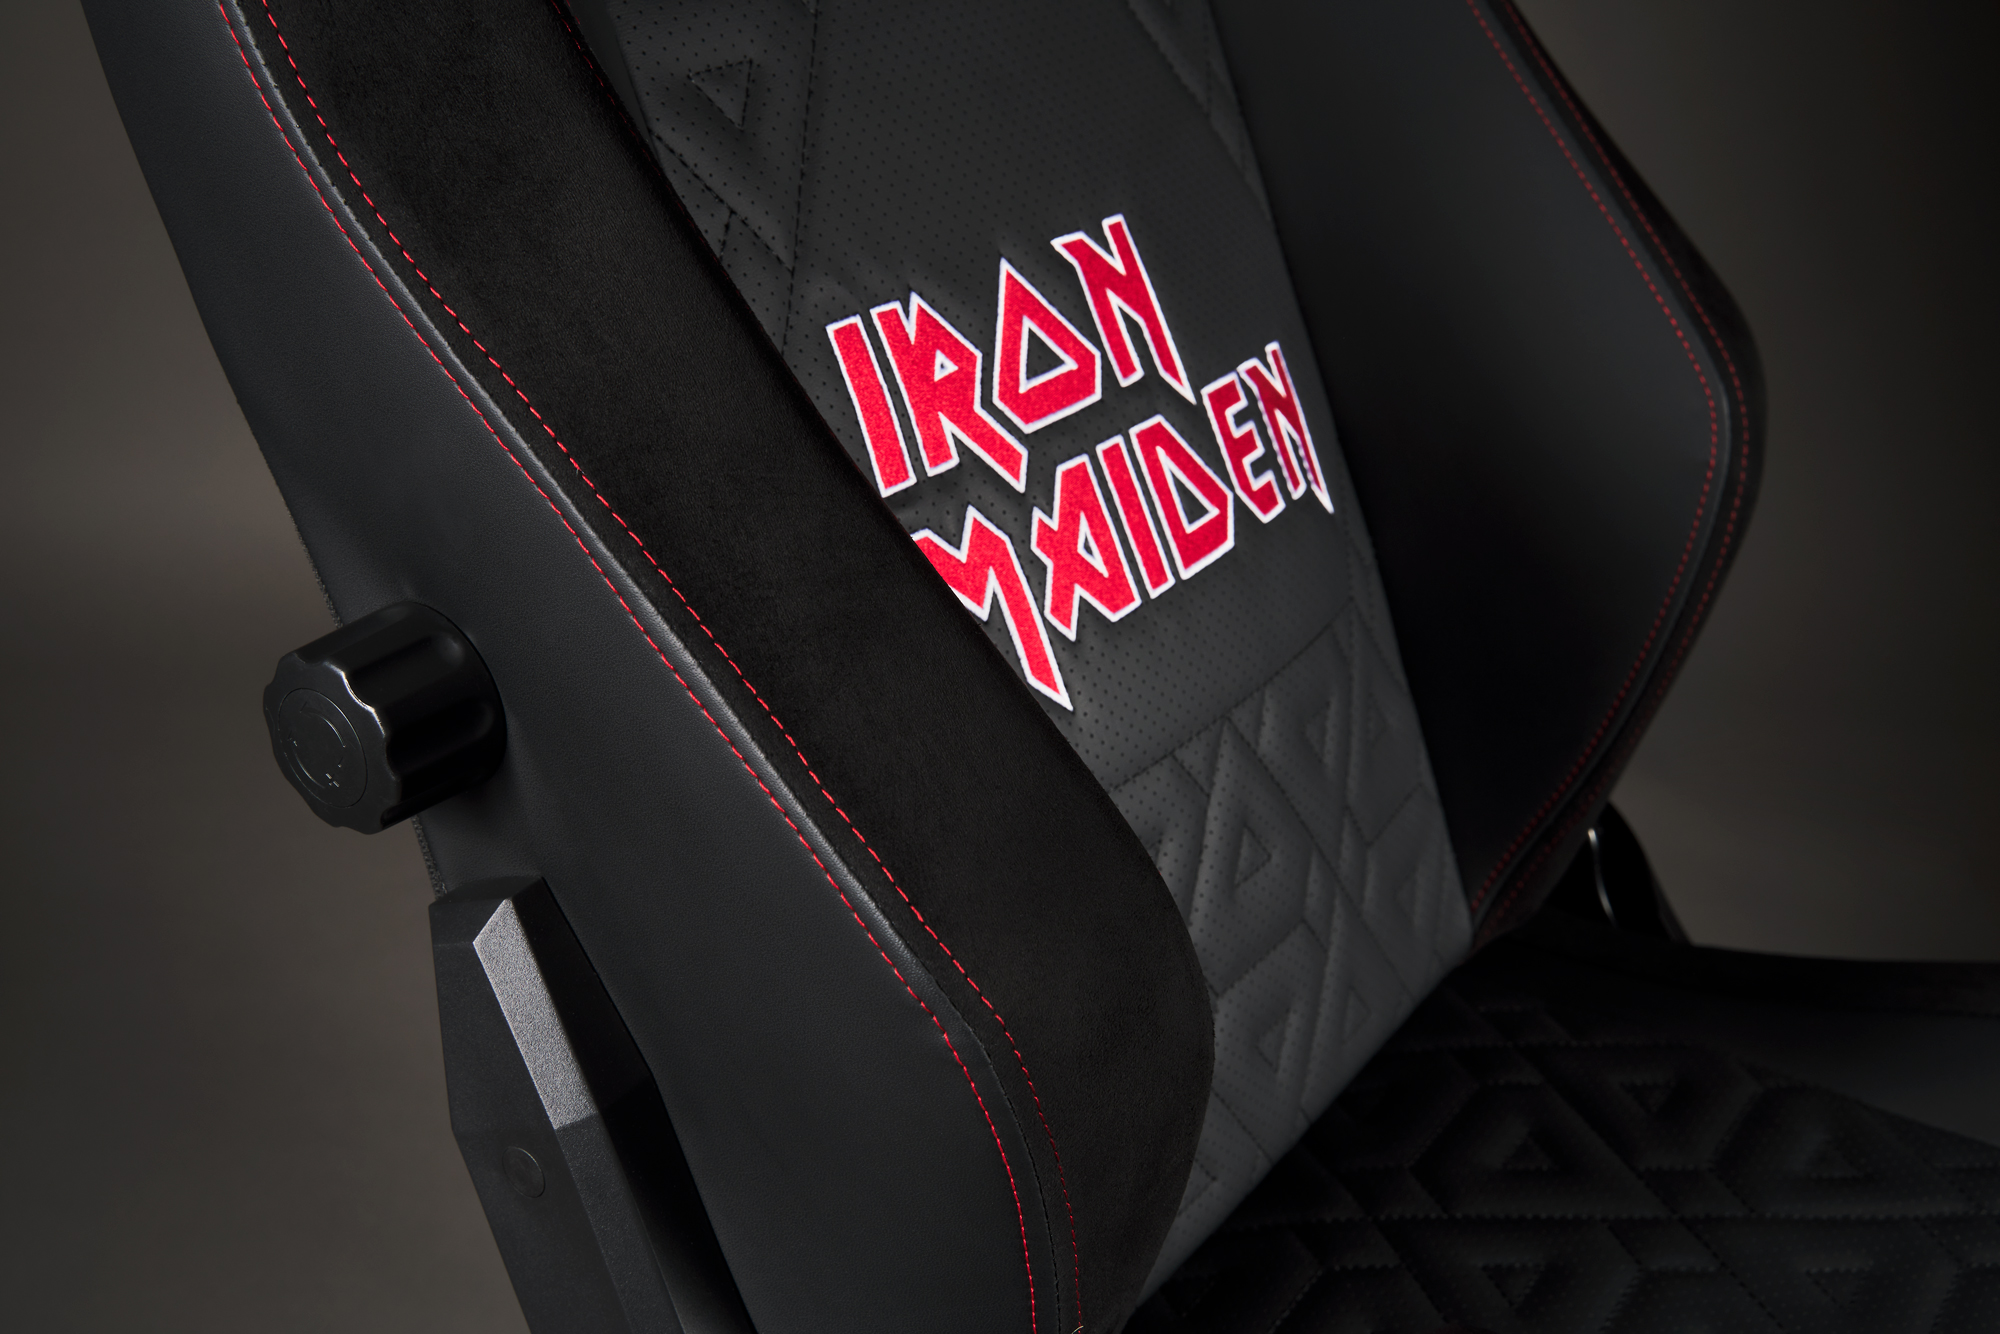 Gaming-Stuhl Apollon Collector Iron Maiden | Iconic by Subsonic